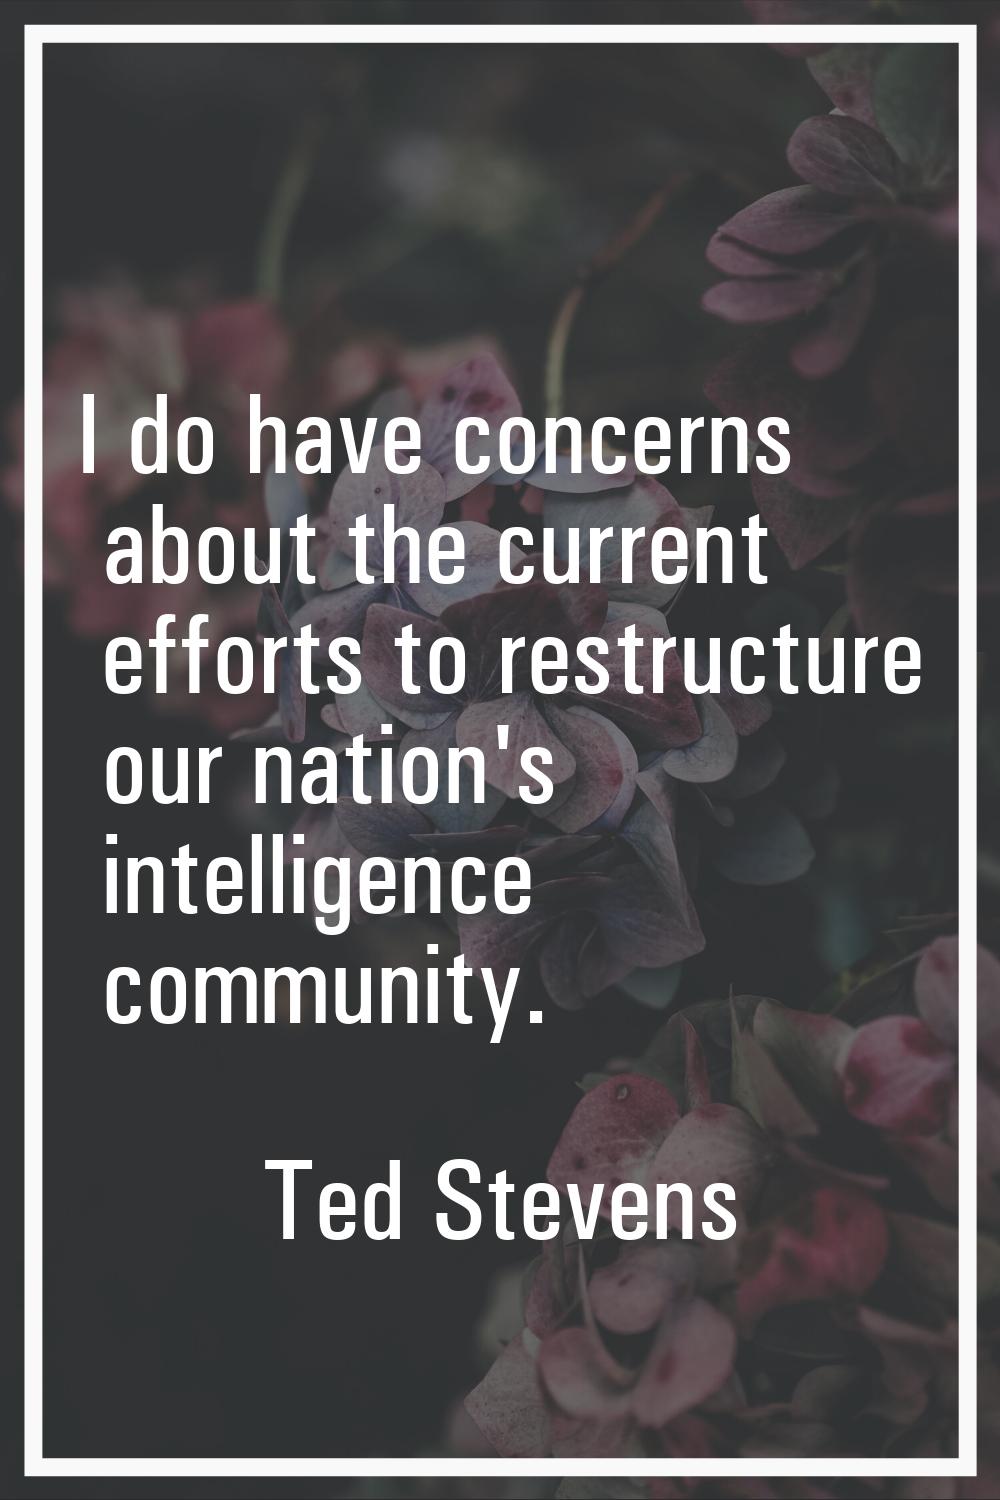 I do have concerns about the current efforts to restructure our nation's intelligence community.